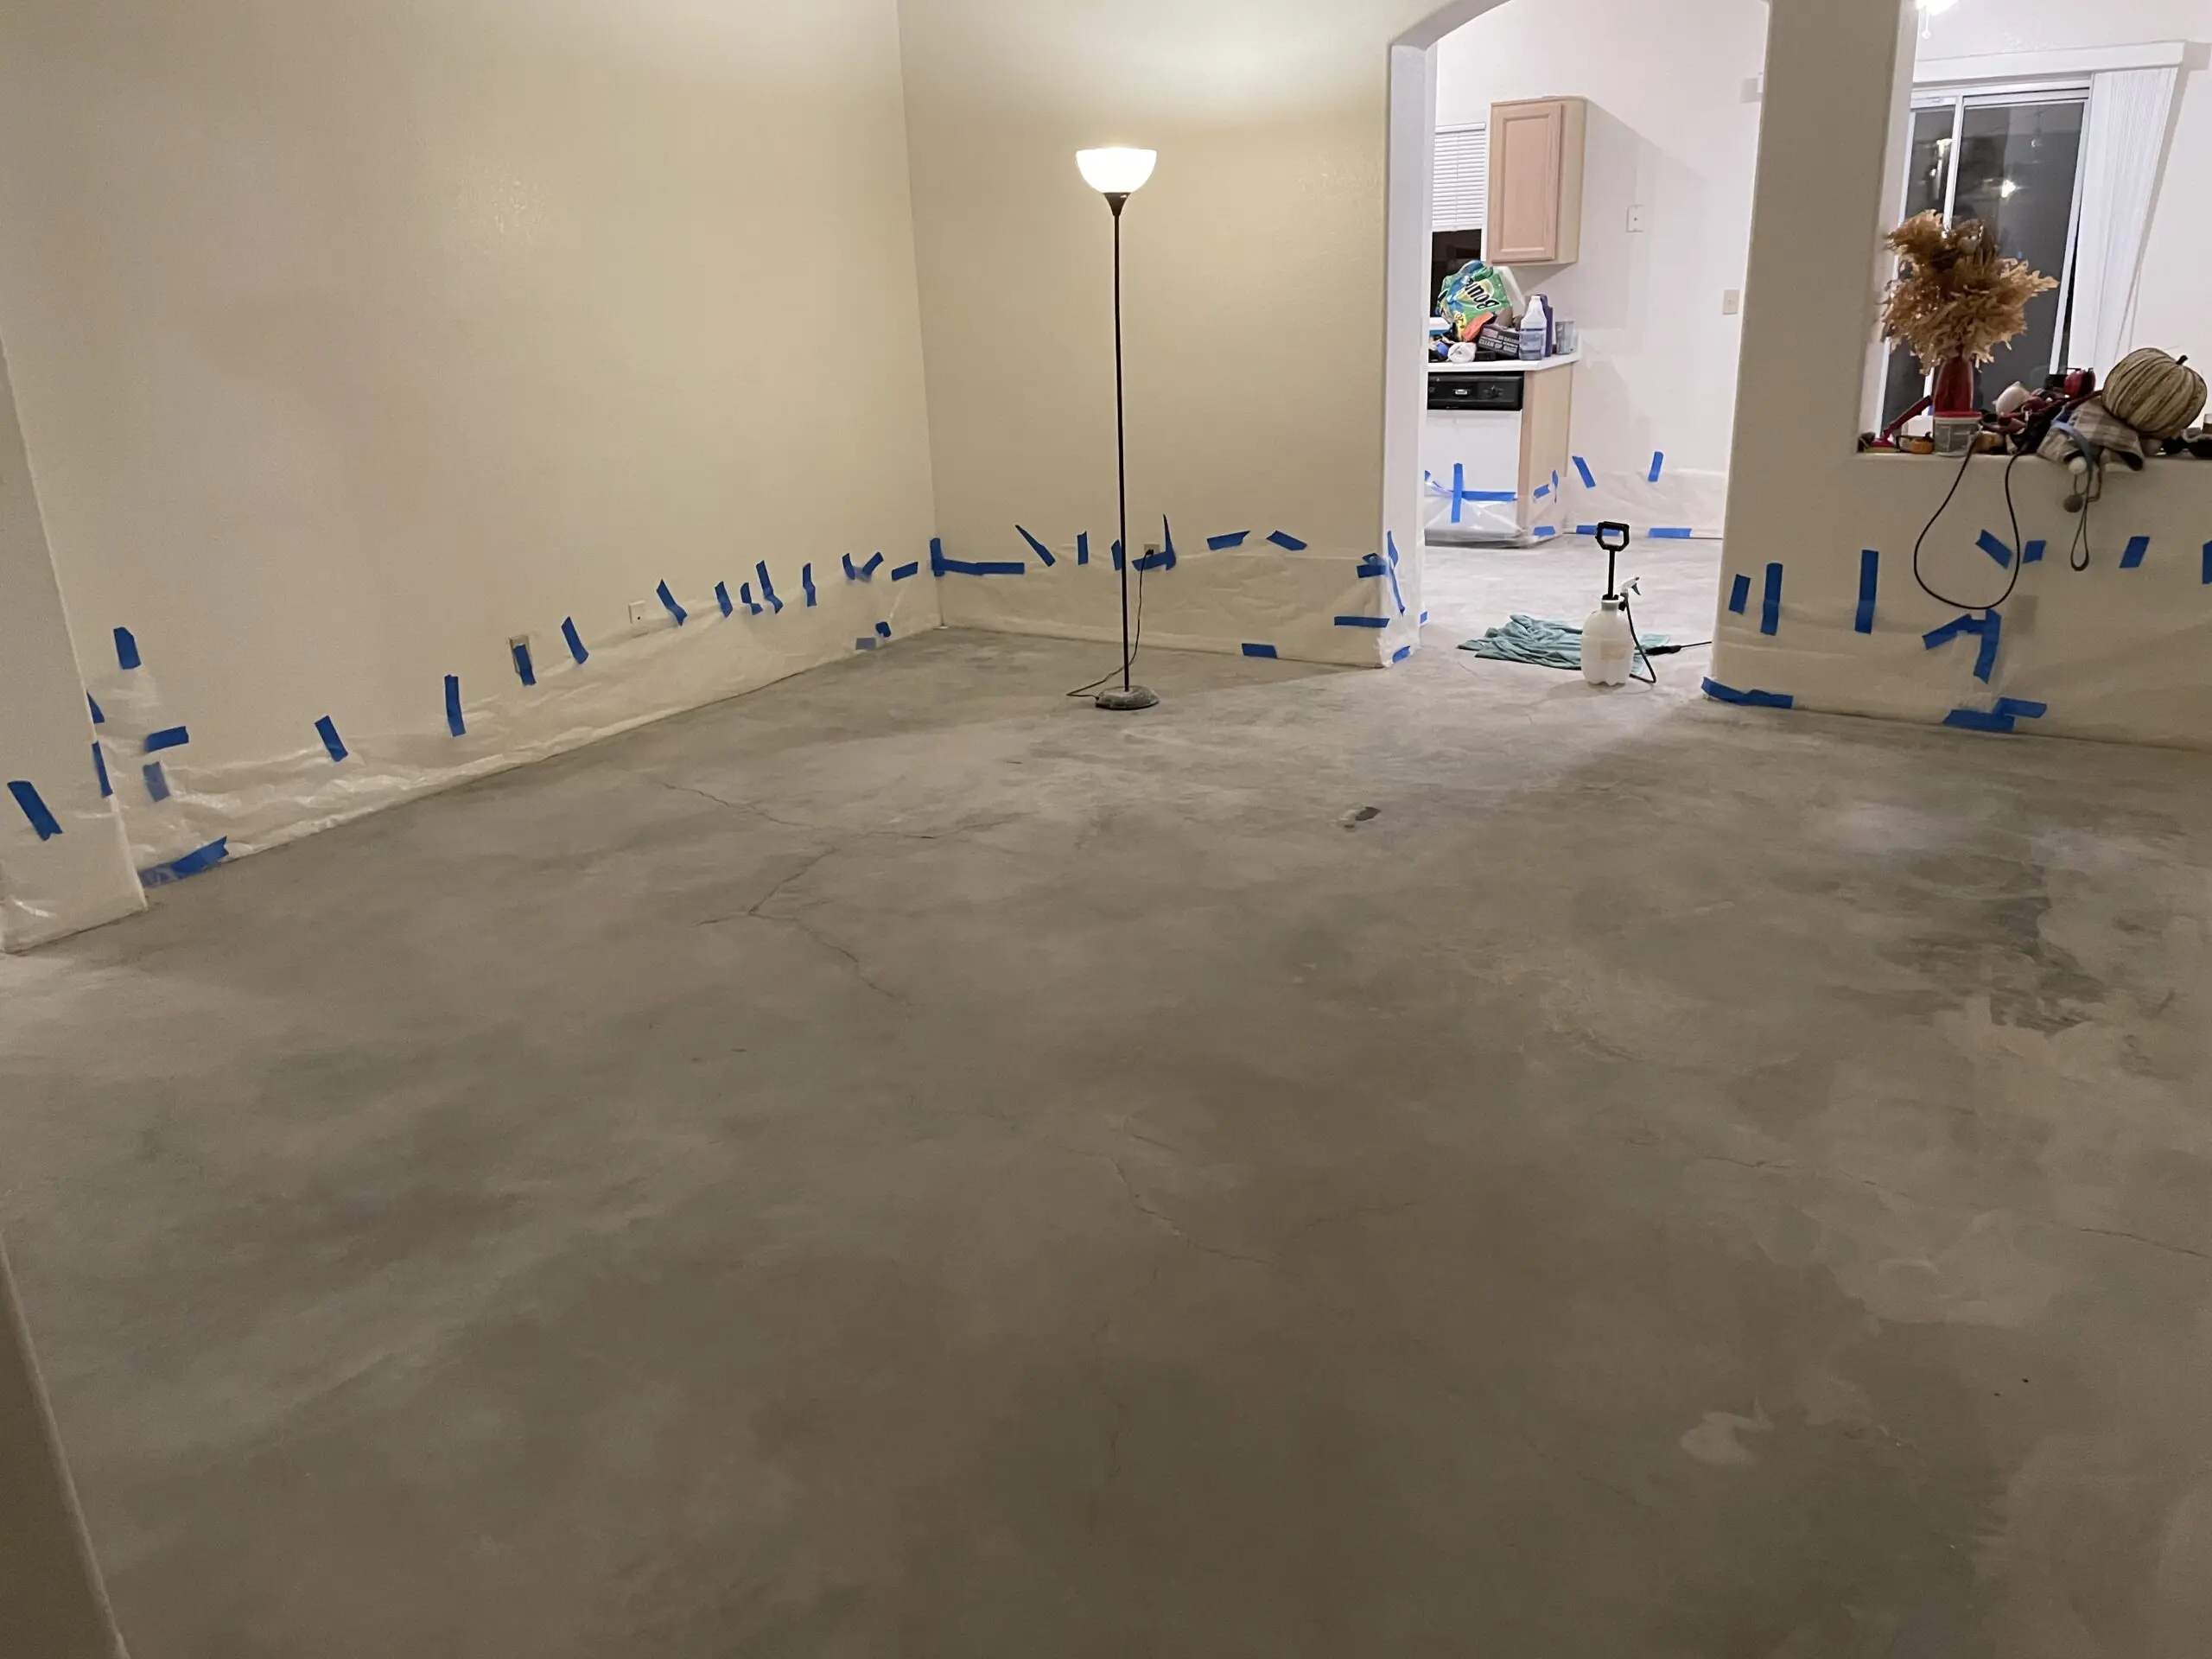 An image of a living room with bare, cleaned concrete floors, ready for the staining process.